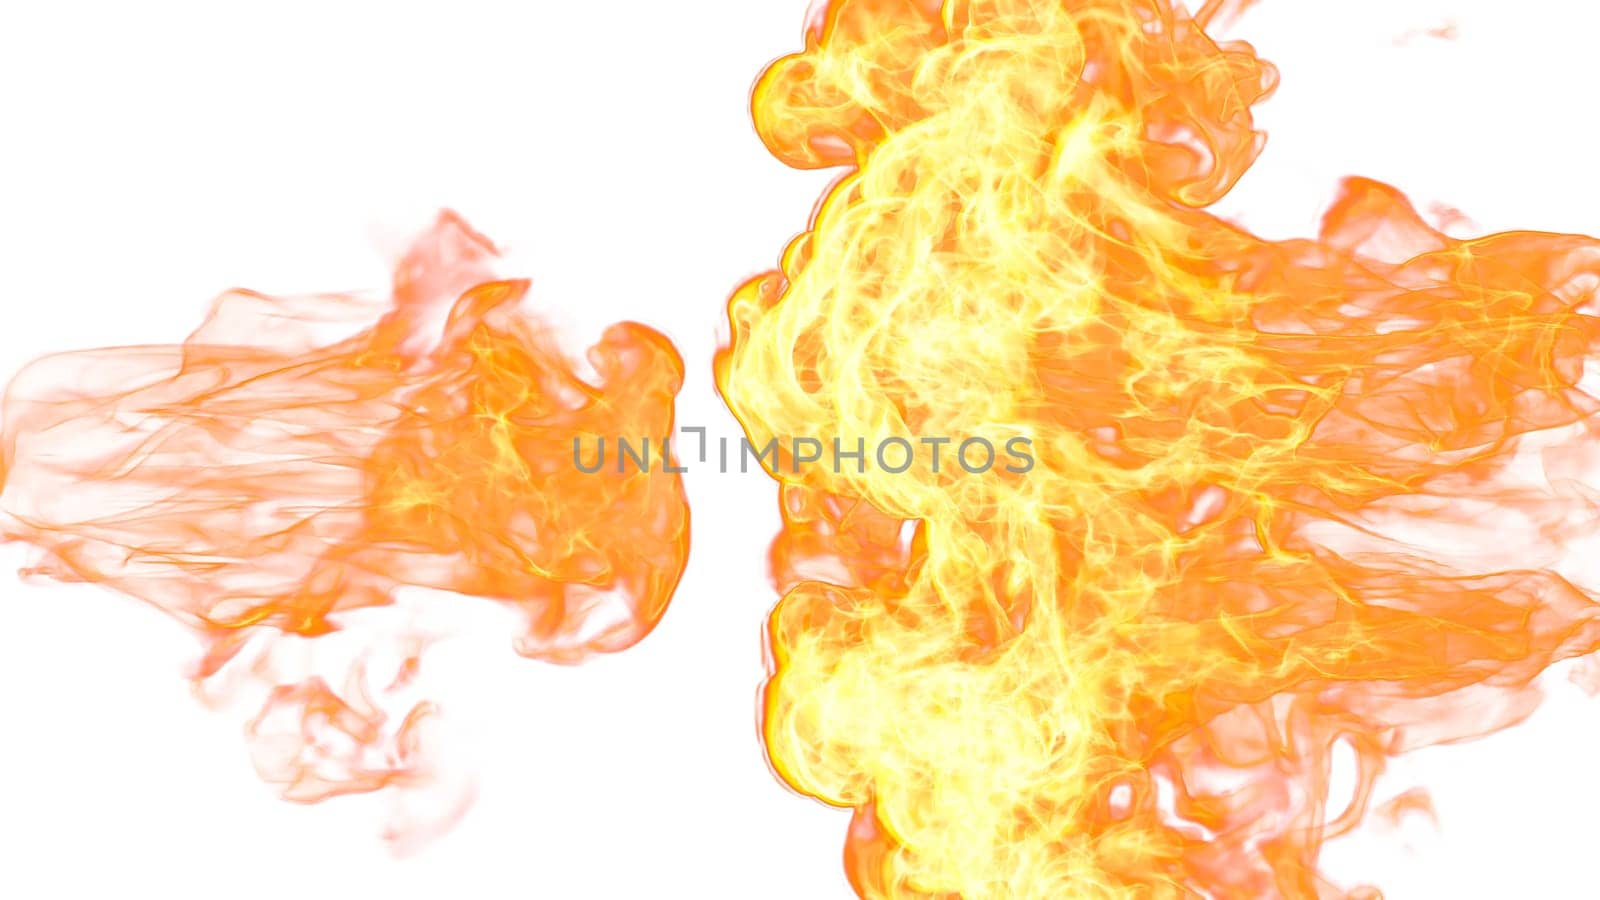 3d illustration. Tongues of flame from two sides on a white background